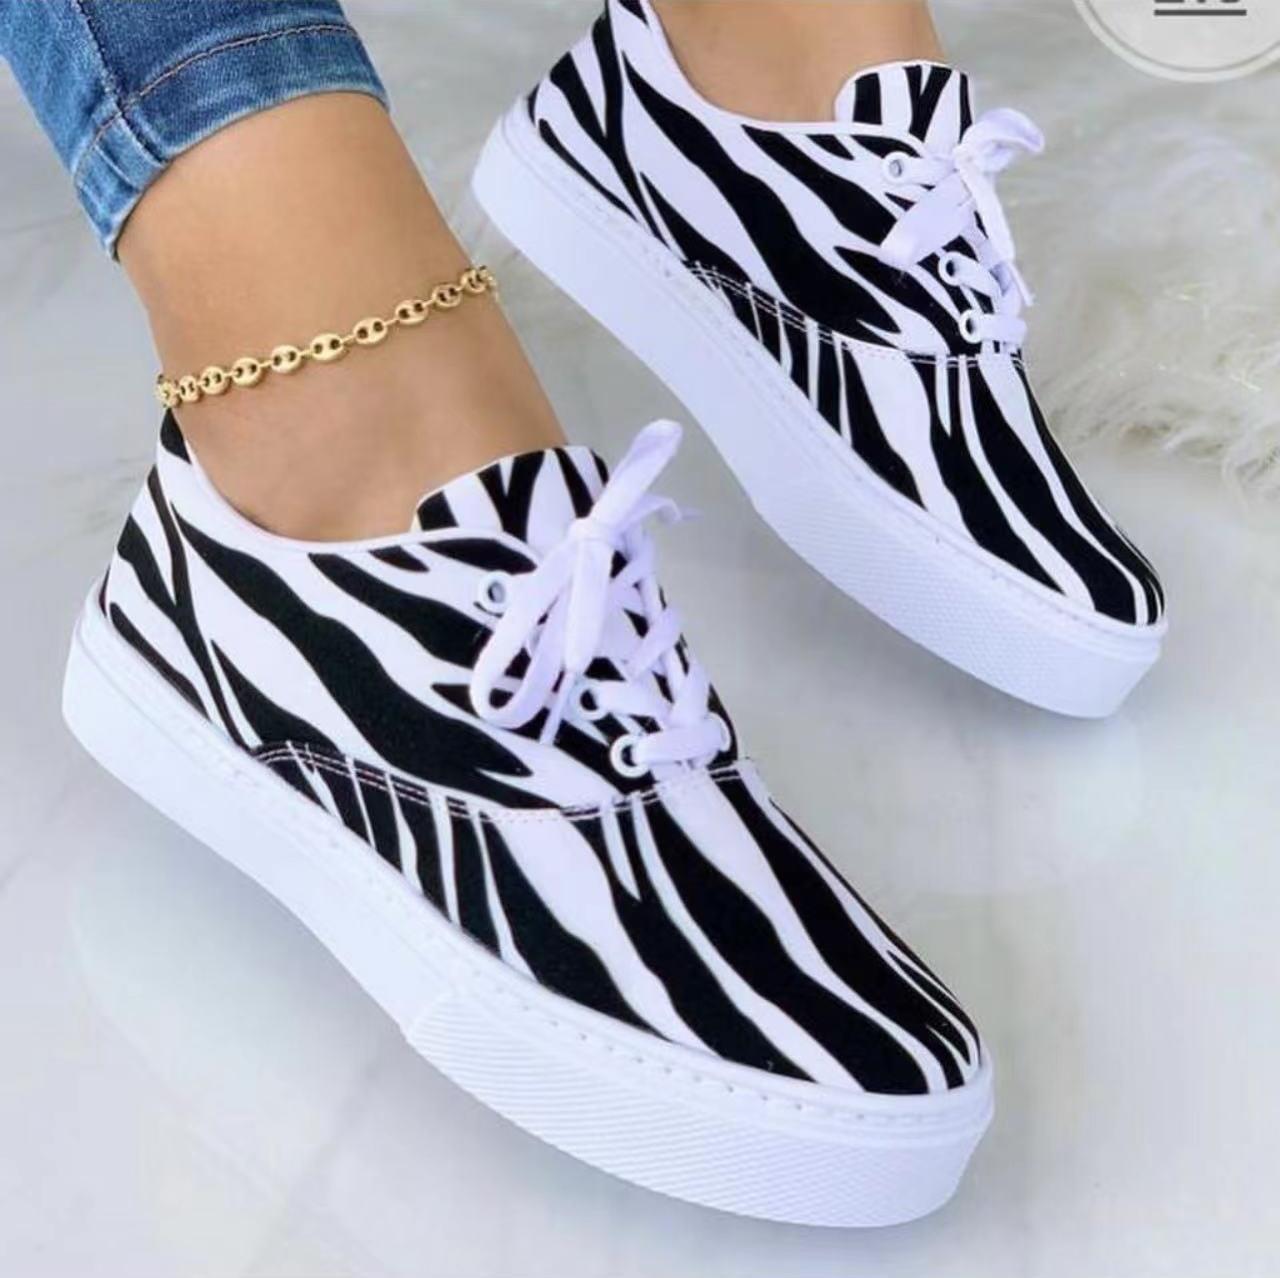 Lace-up Flats Shoes Print Canvas Fashion Walking Sneakers Women